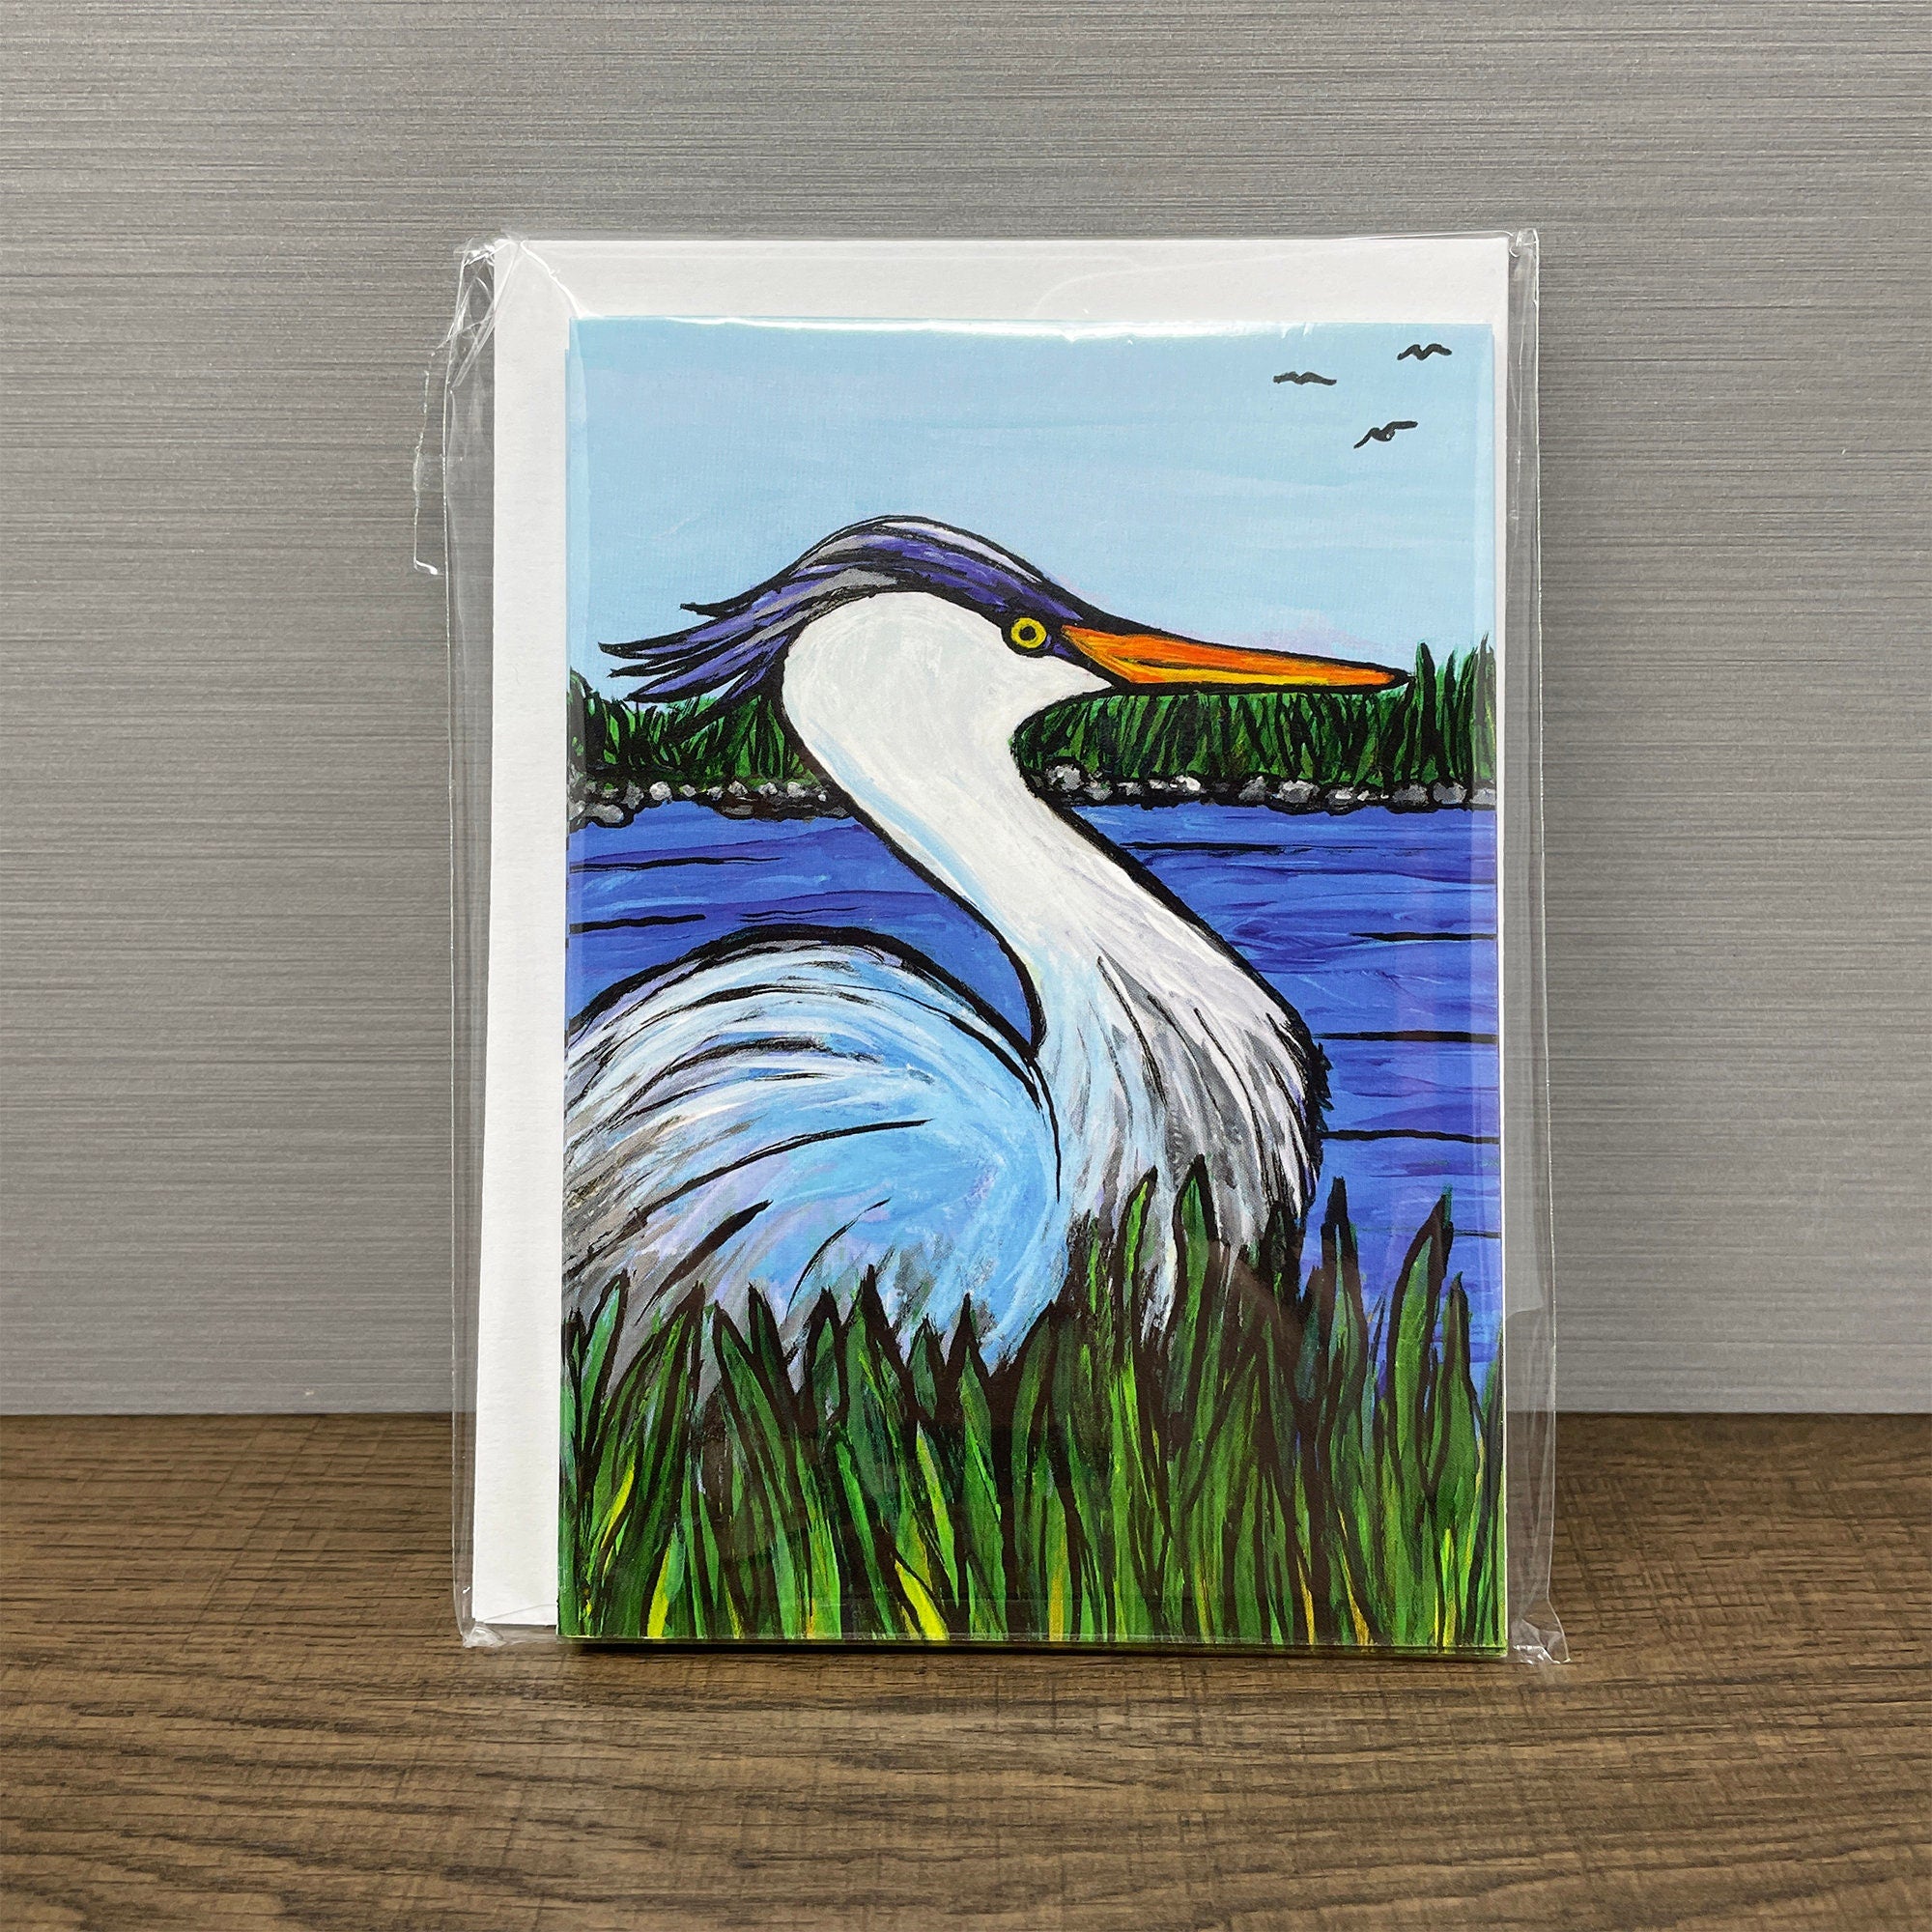 Blank Note Cards with Great Blue Heron Bird - Notecard Envelopes Set of 4 - Water Wading Bird Blank Greeting Card